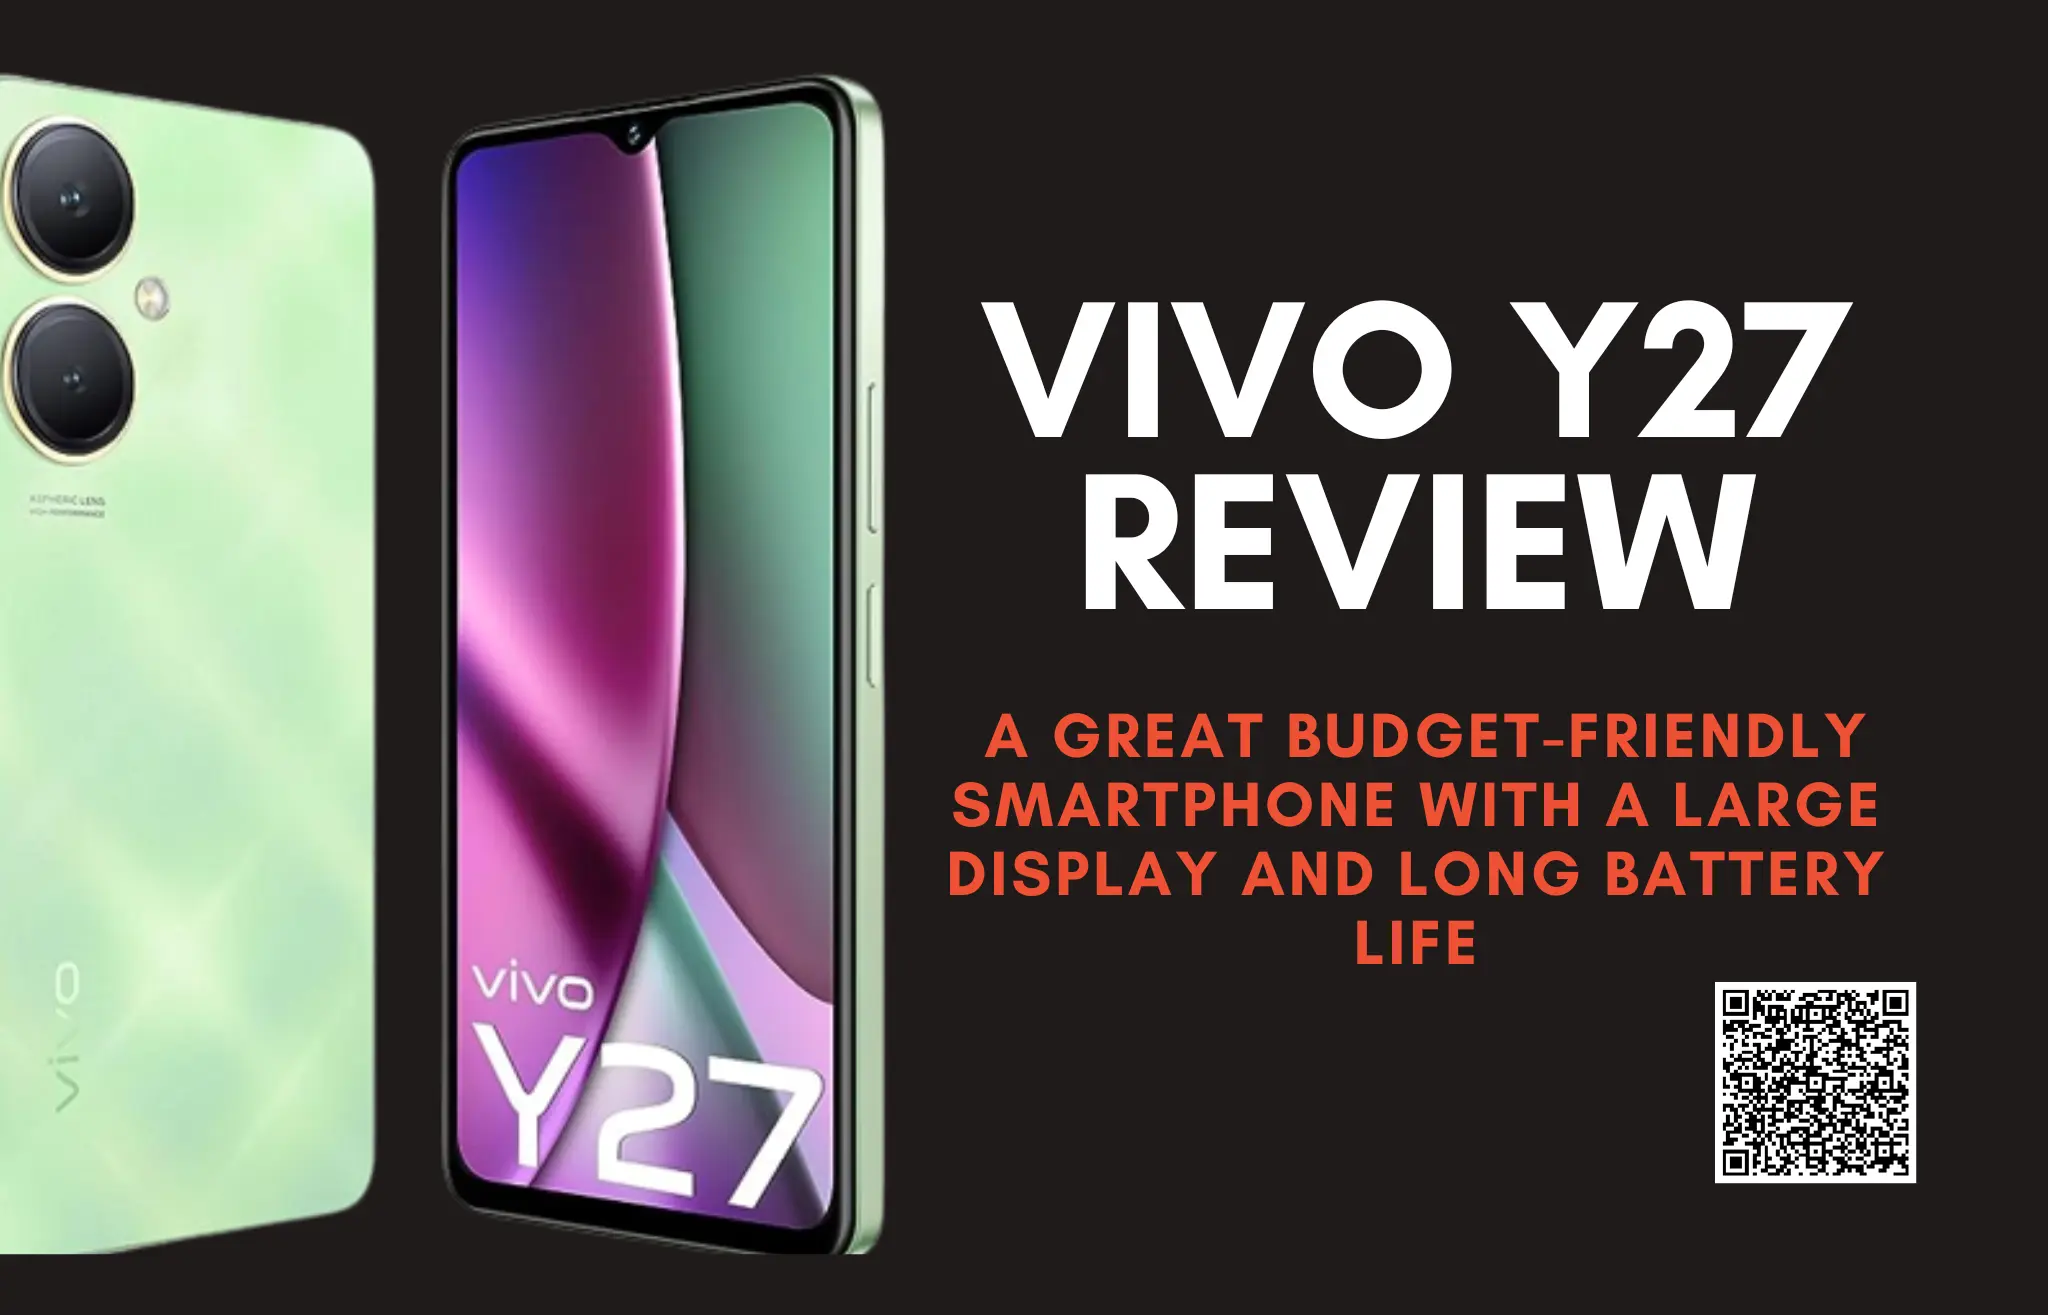 Vivo Y27 Review A Great Budget-Friendly Smartphone with a Large Display and Long Battery Life